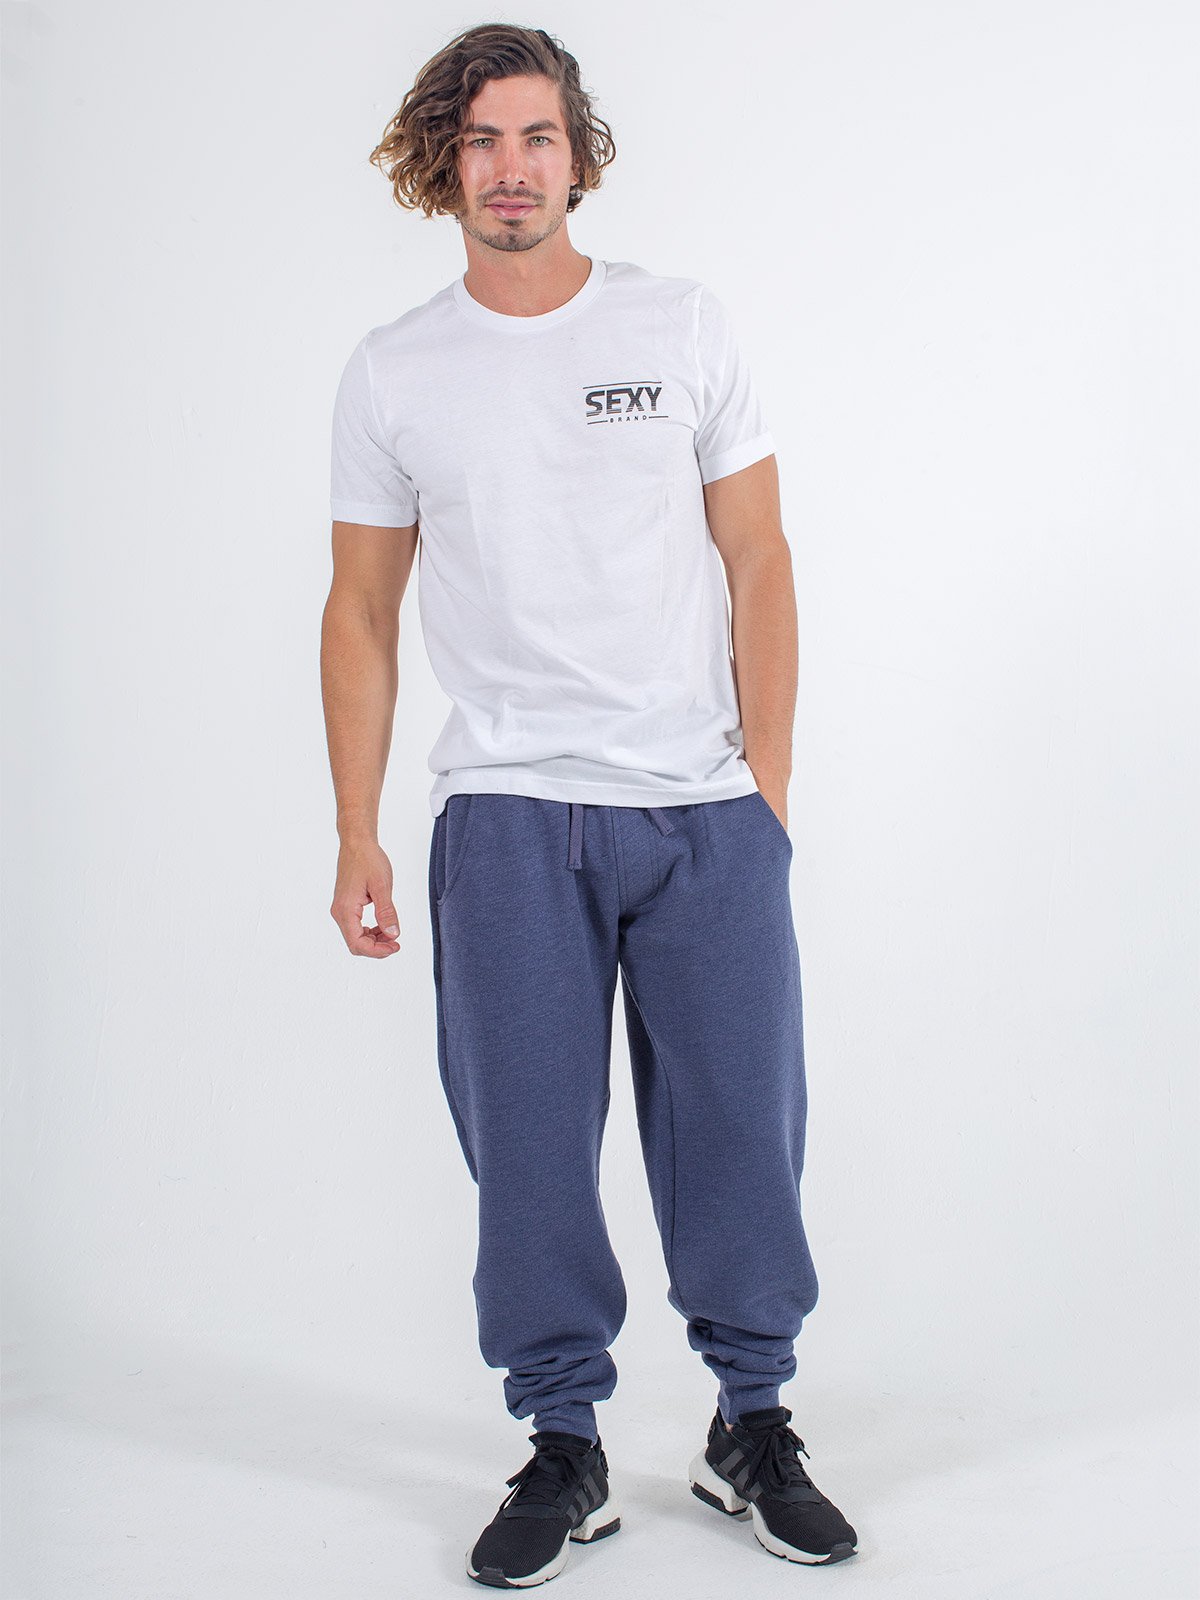 mens sweats joggers sexy brand in navy blue with white t-shirt